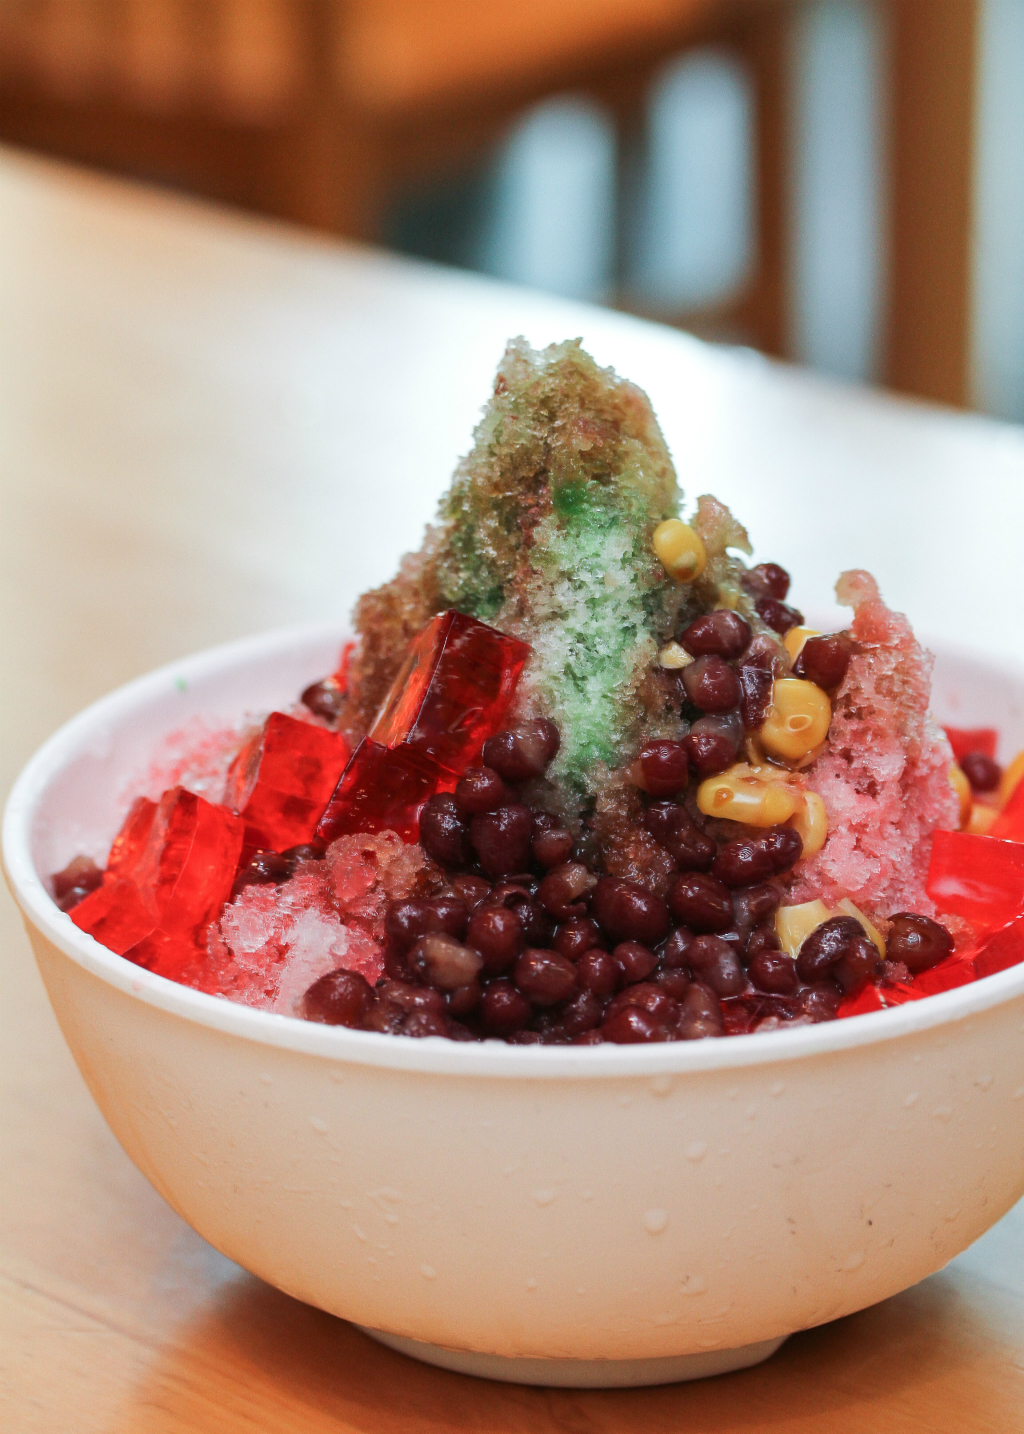 We made our own Ice Kachang @ Food Republic